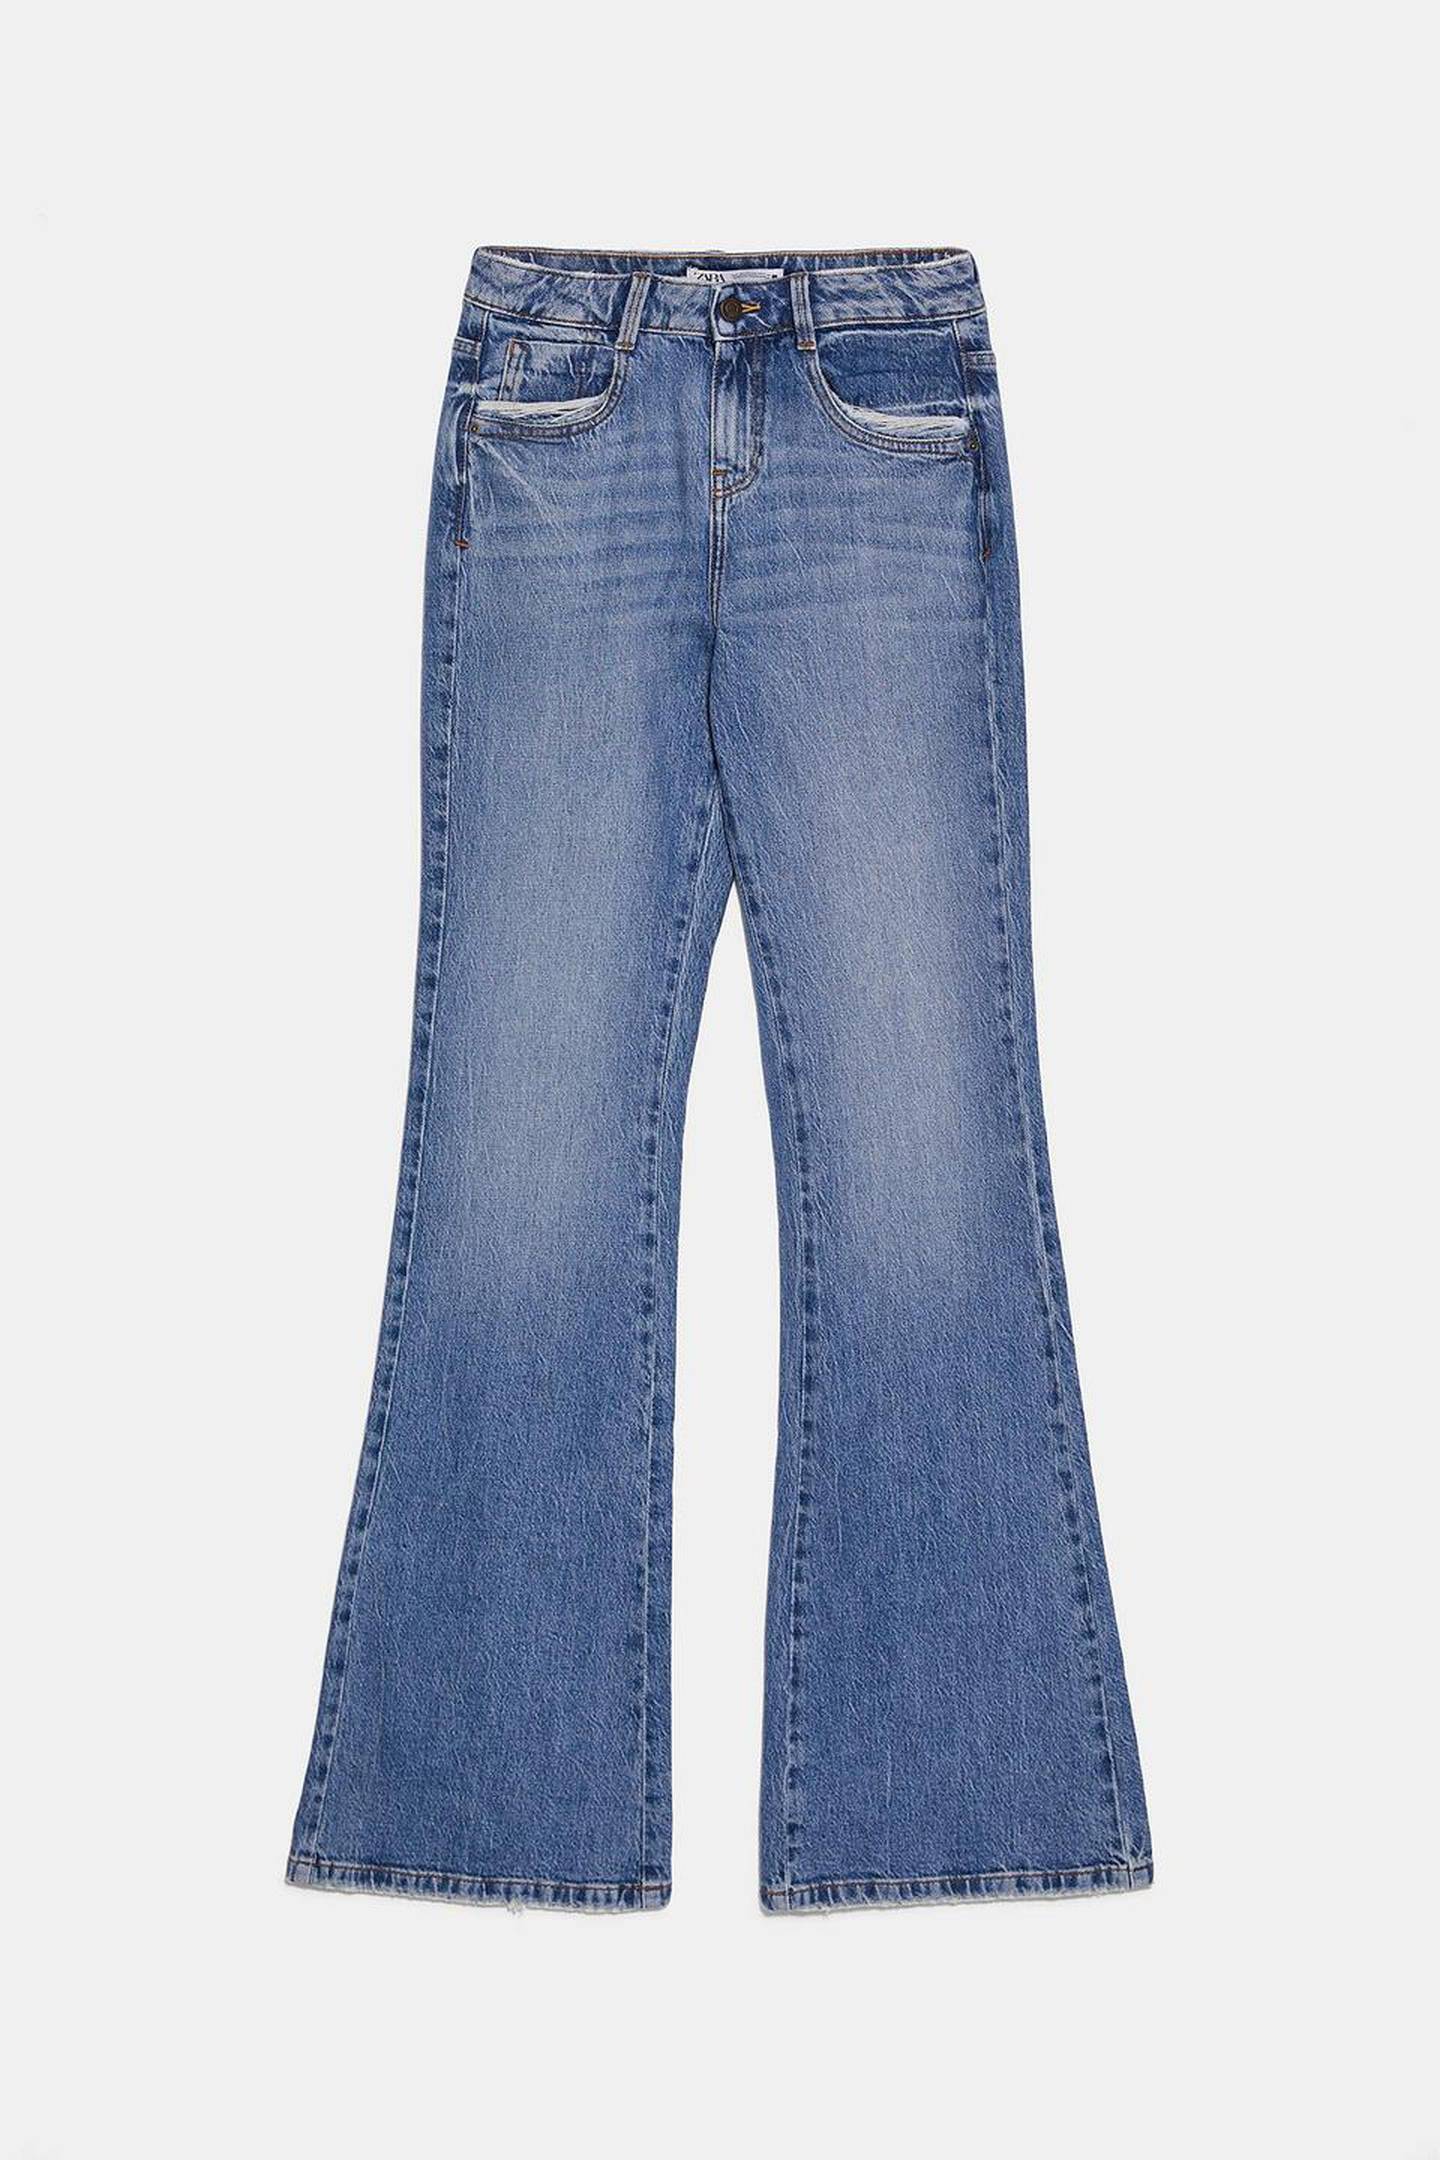 The best blue jeans to buy this spring – The Irish Times